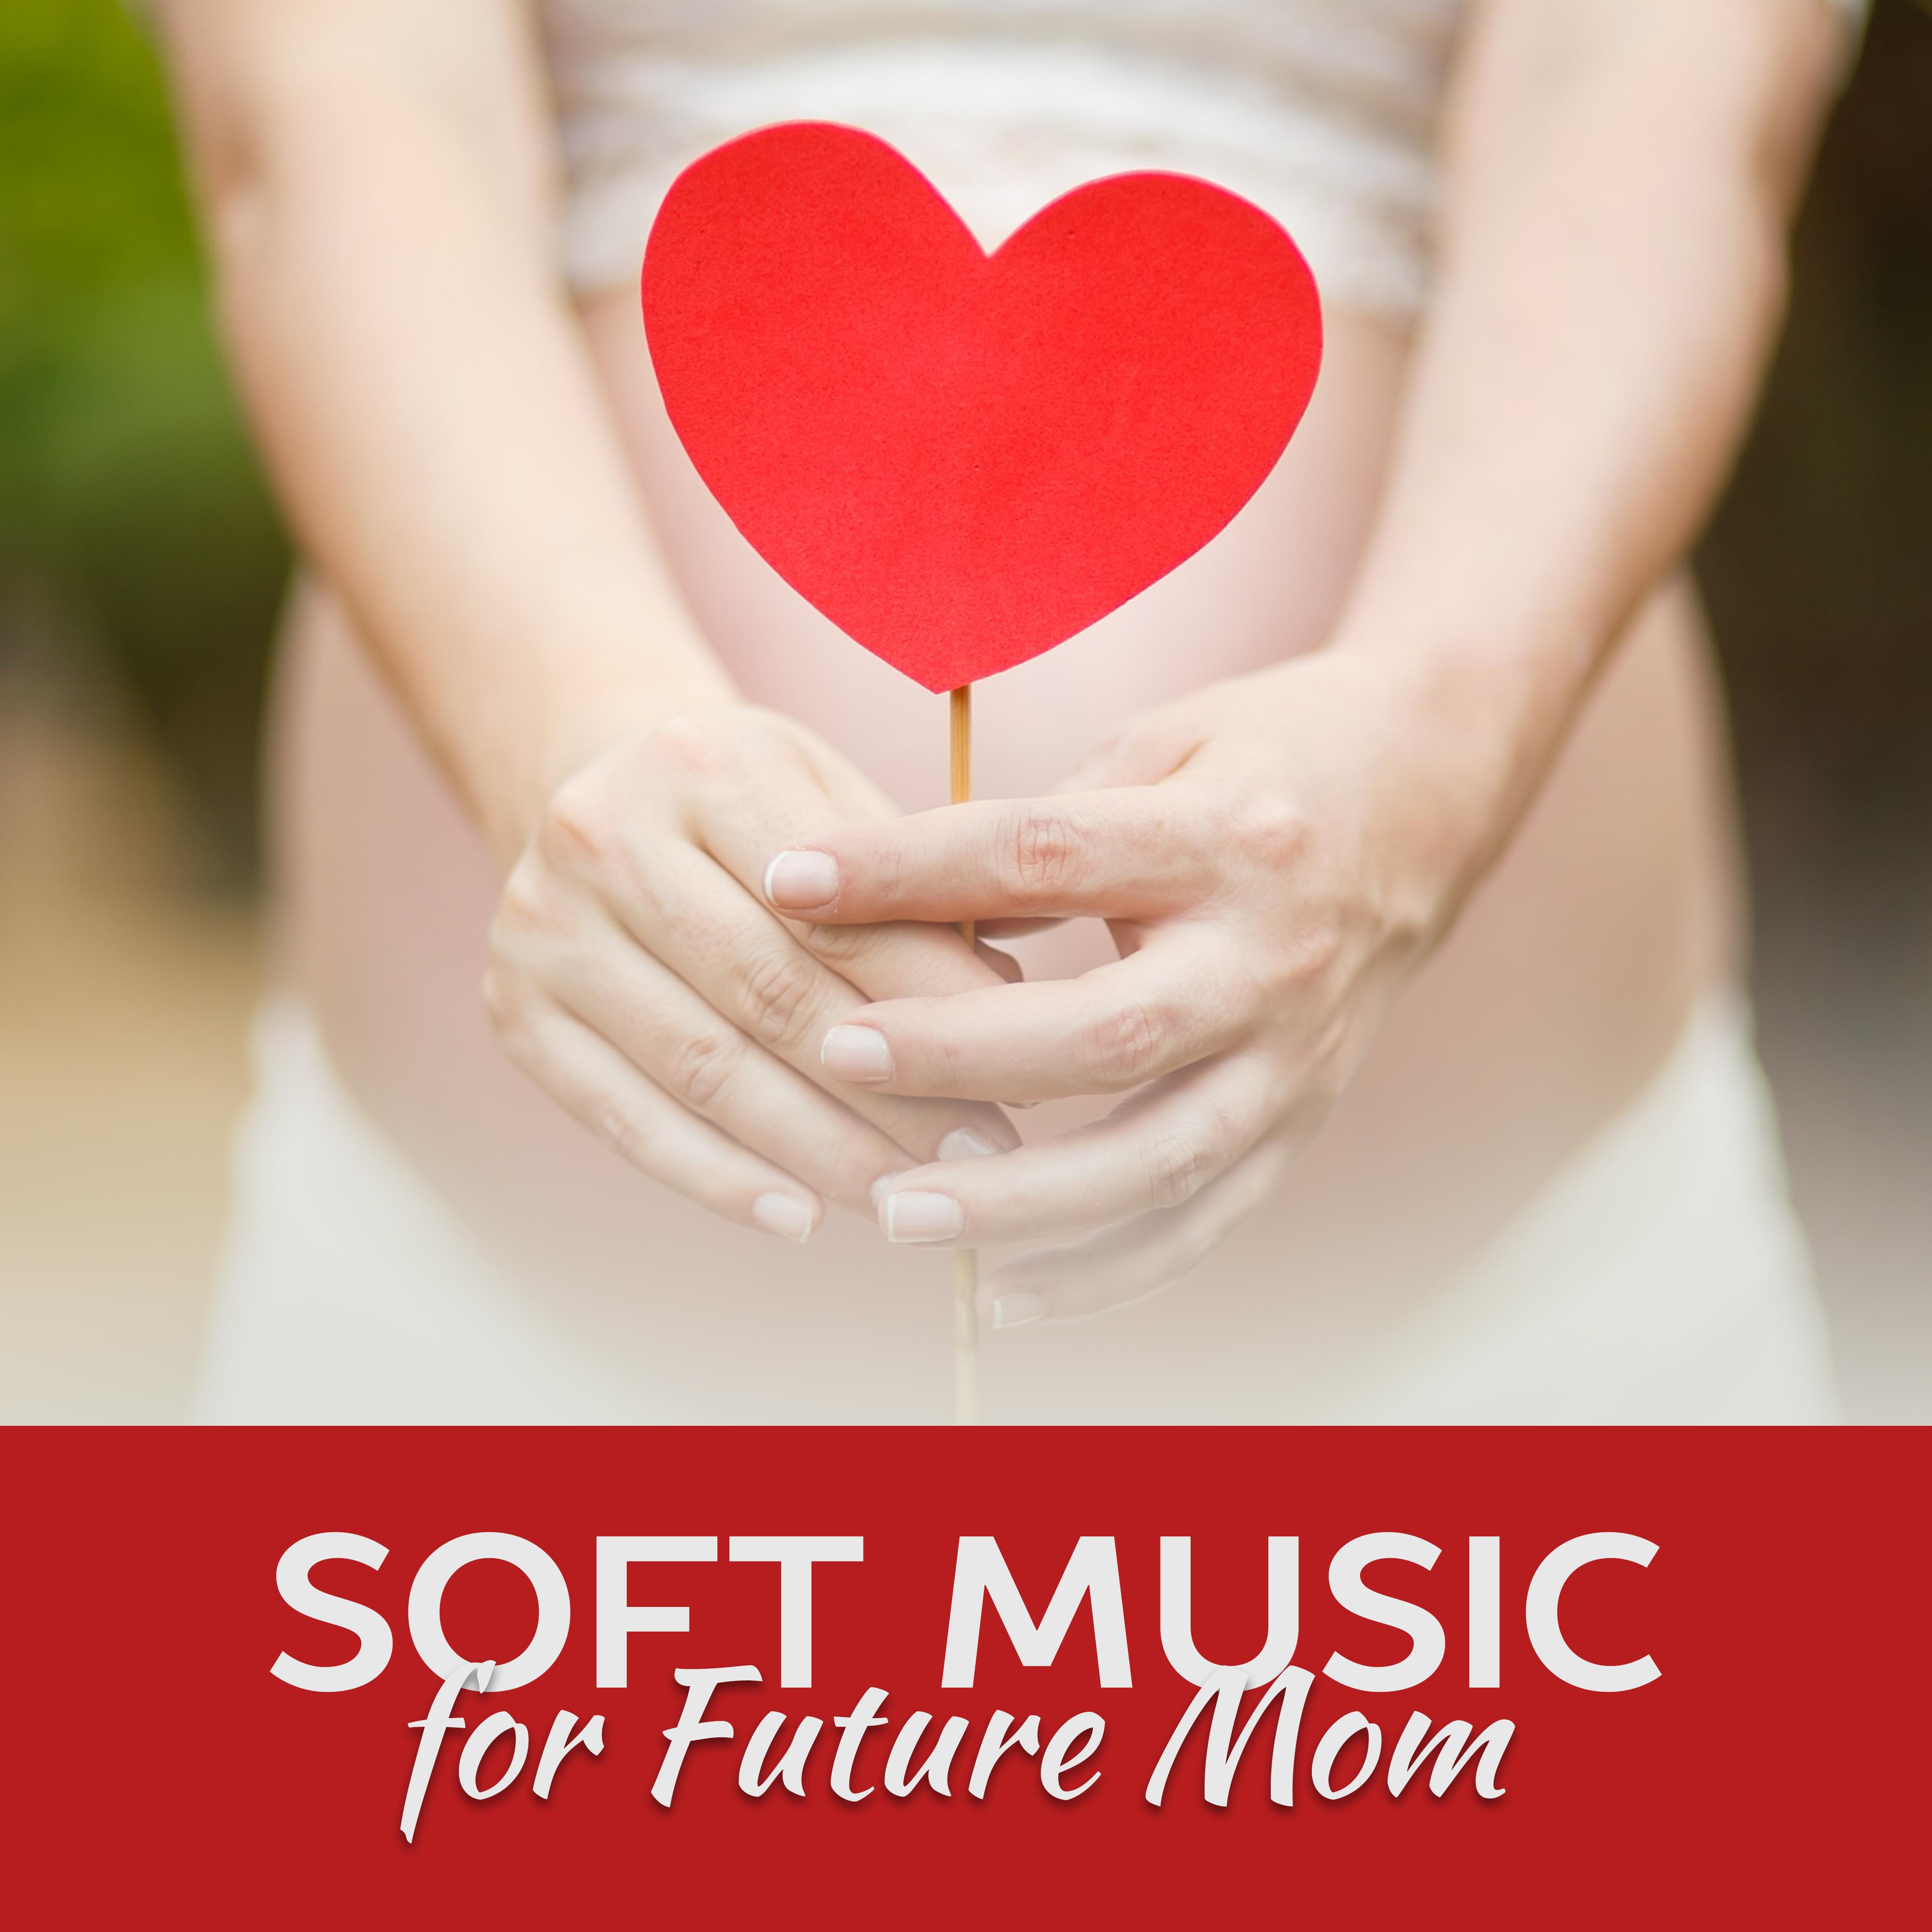 Soft Music for Future Mom – Therapy Sounds, Stress Relief, Relaxing Sounds to Rest, Peaceful Baby, Restful Sleep, Harmony